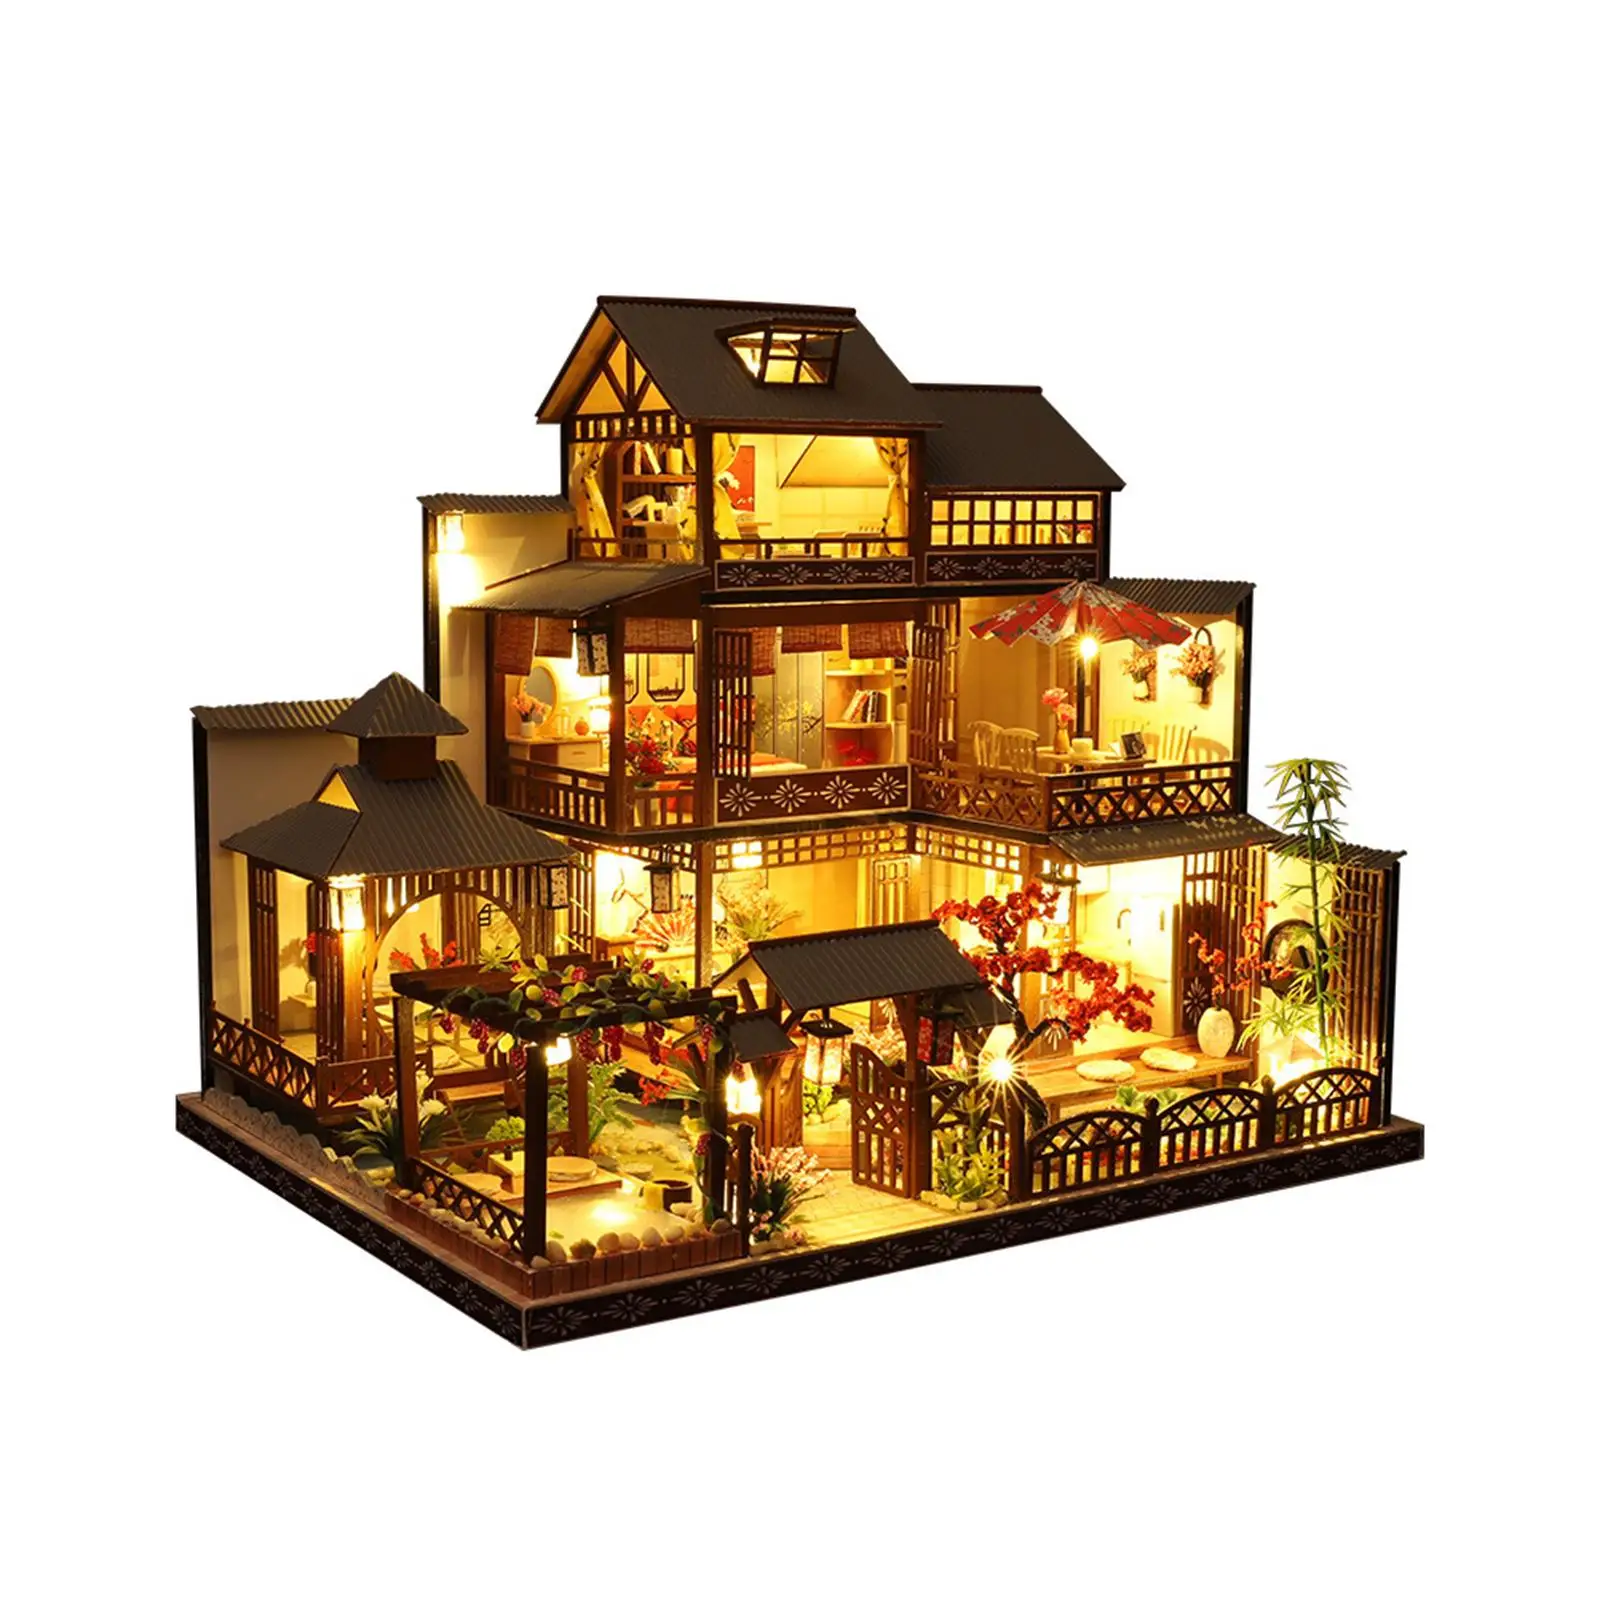 Diy Dollhouses Miniature 1:24 Scale Creative Building for Kids Teens Adults